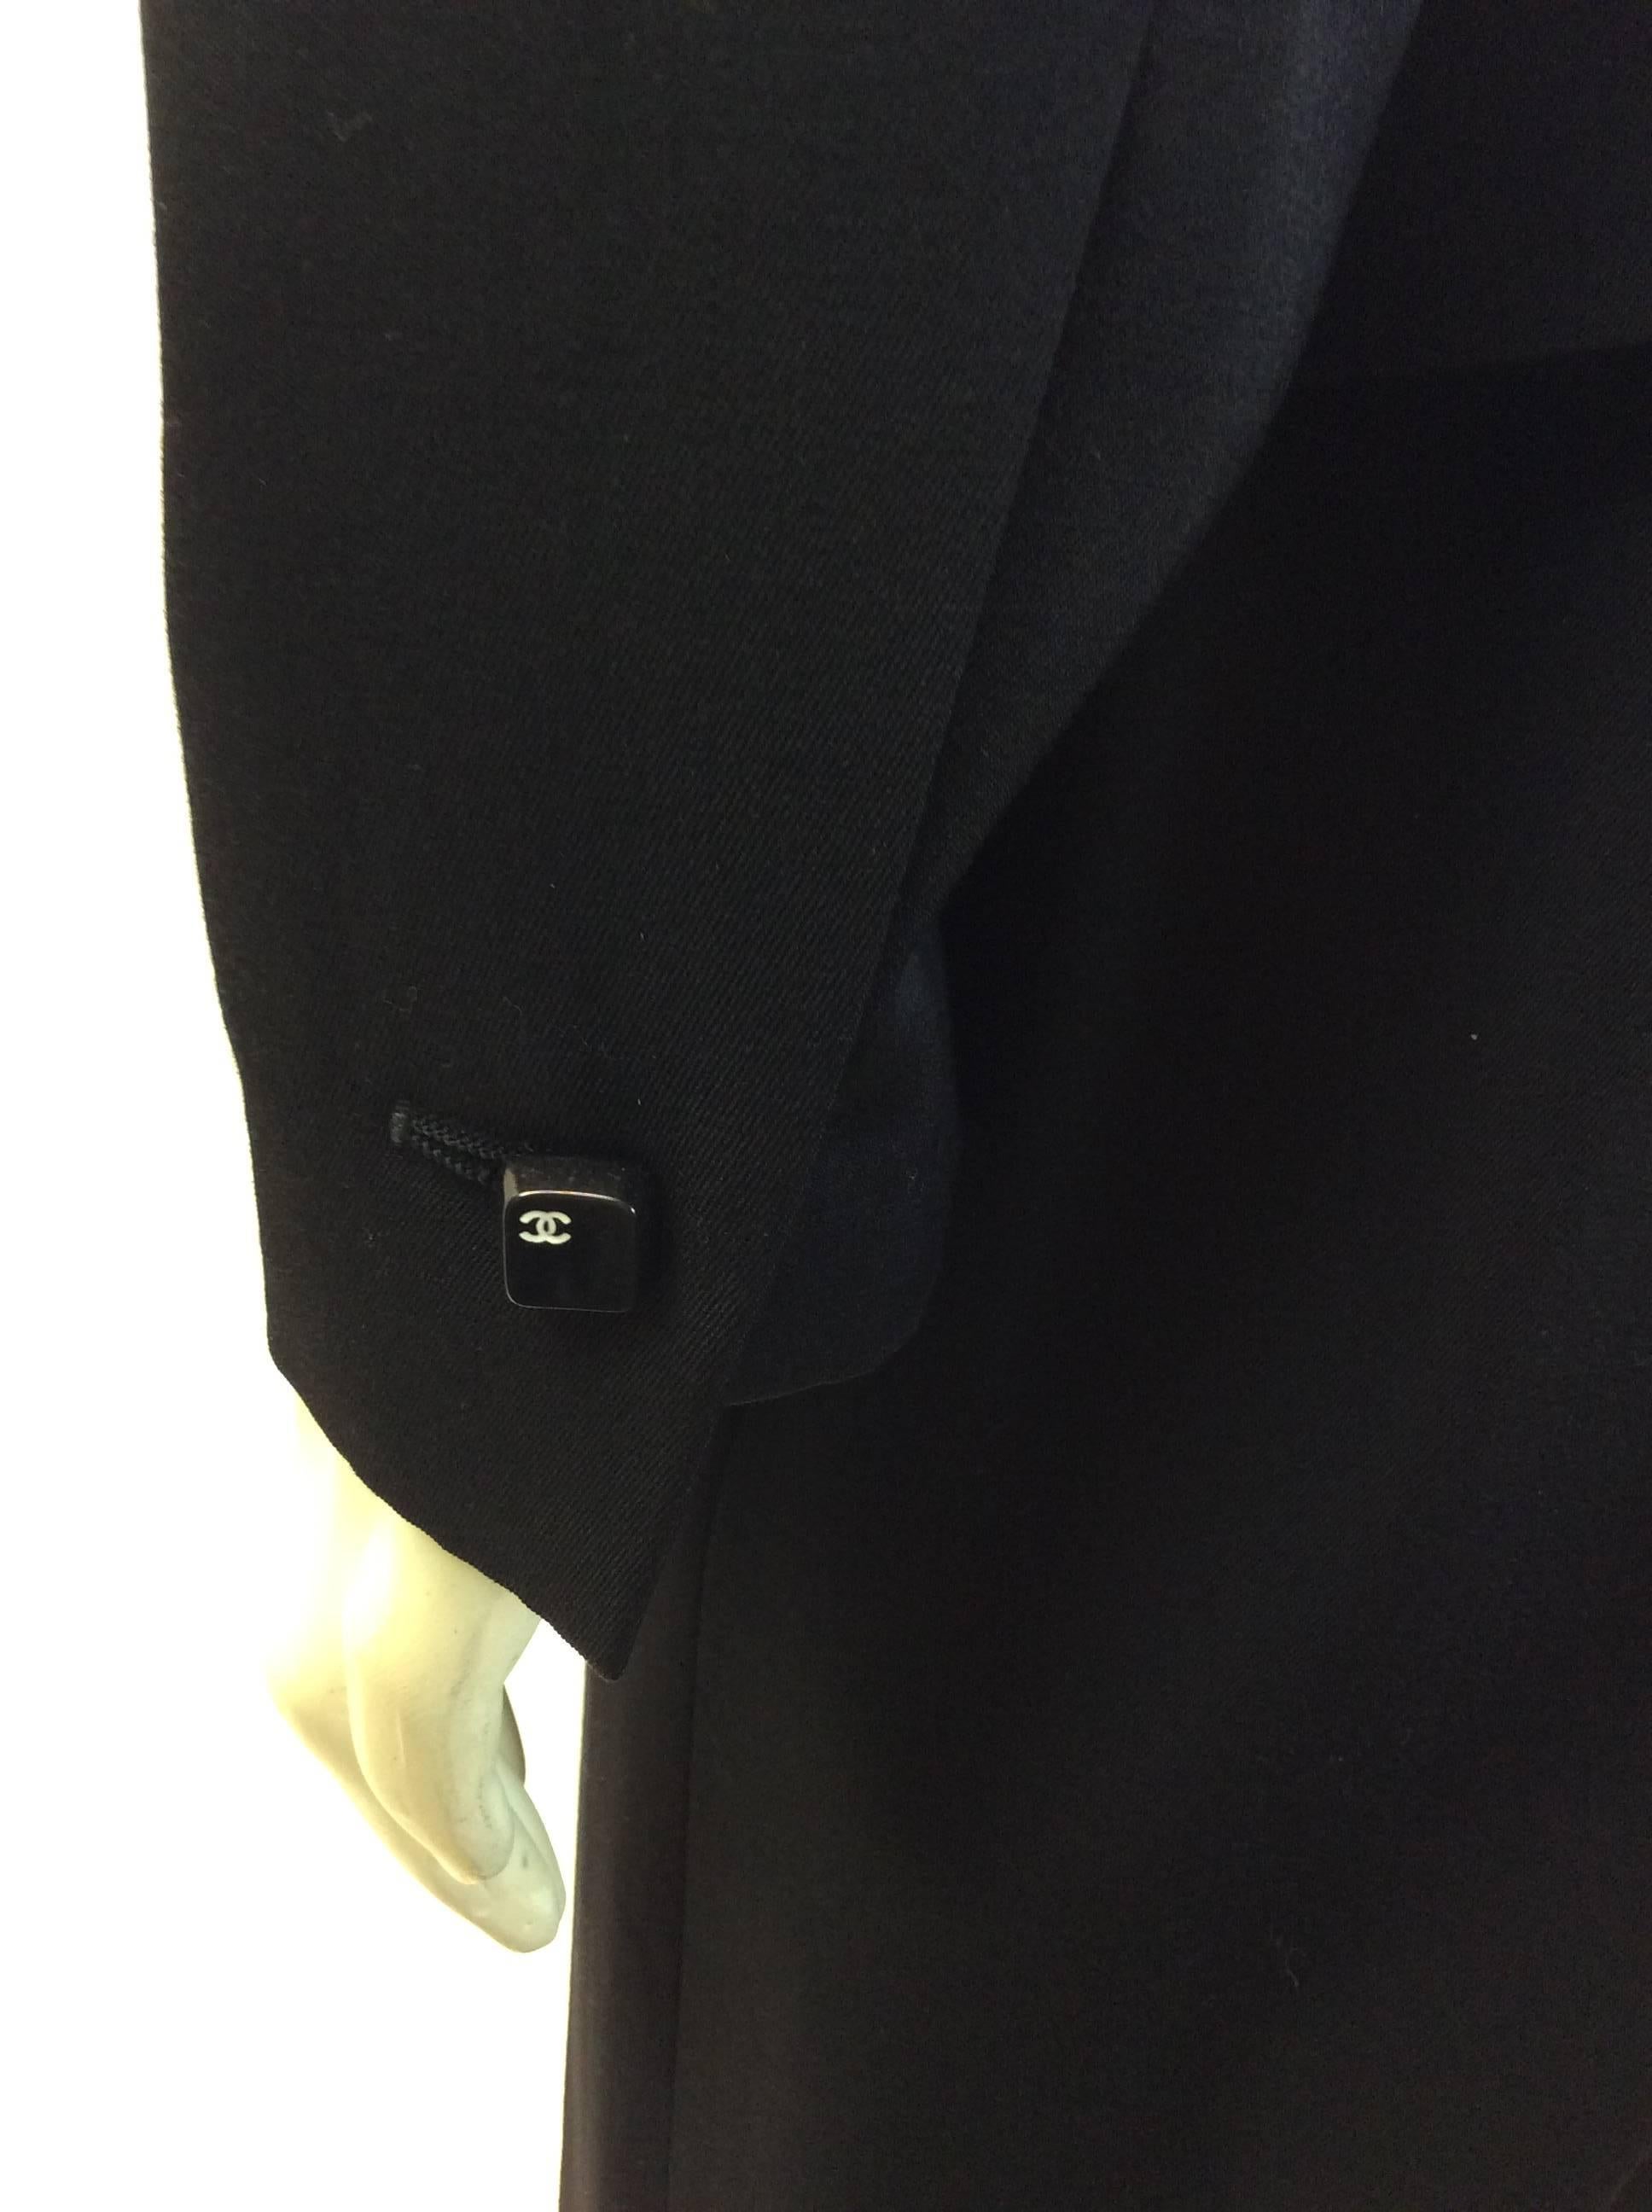 Chanel Black Wool Pant Suit In Excellent Condition For Sale In Narberth, PA